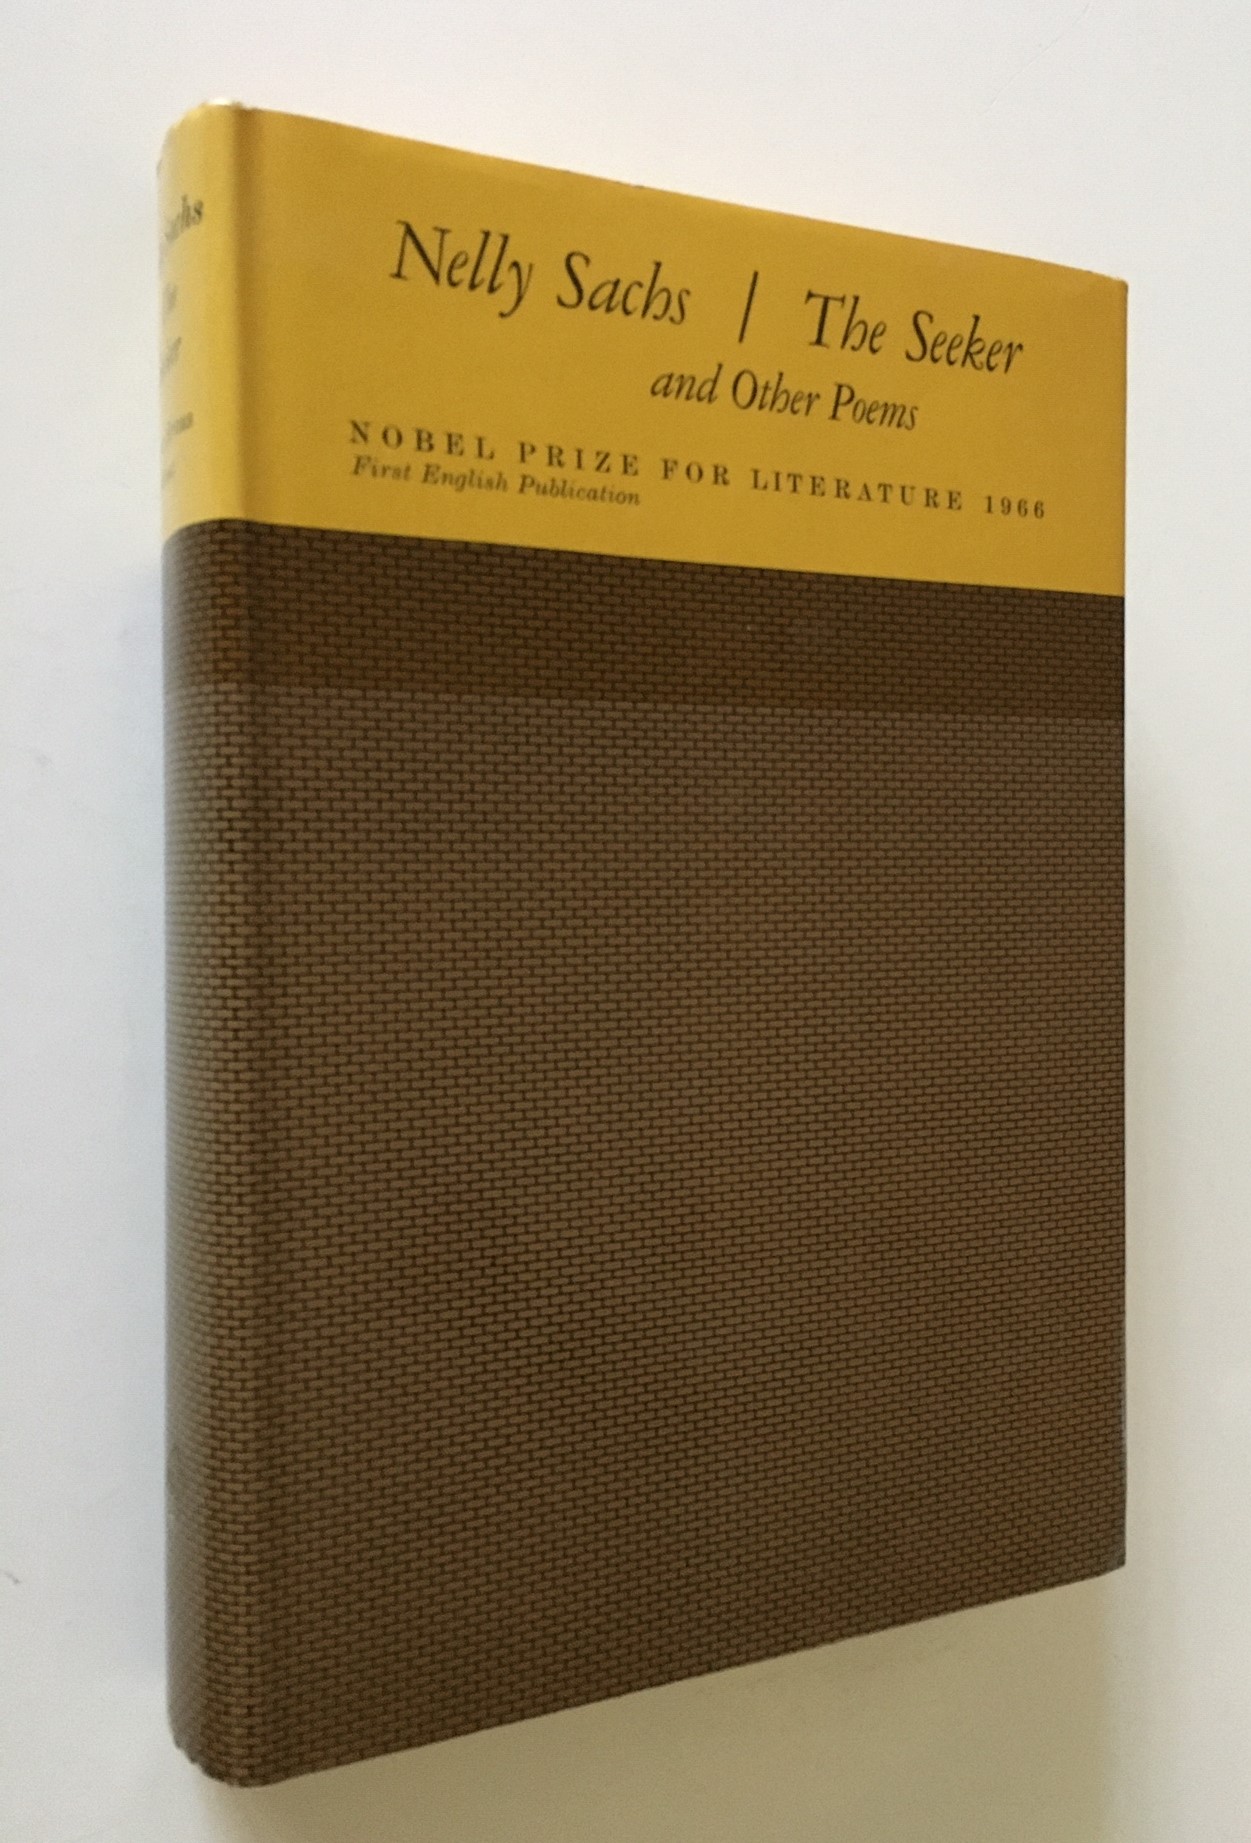 The Seeker, and Other Poems by Sachs, Nelly: Near Fine Hardcover (1970 ...